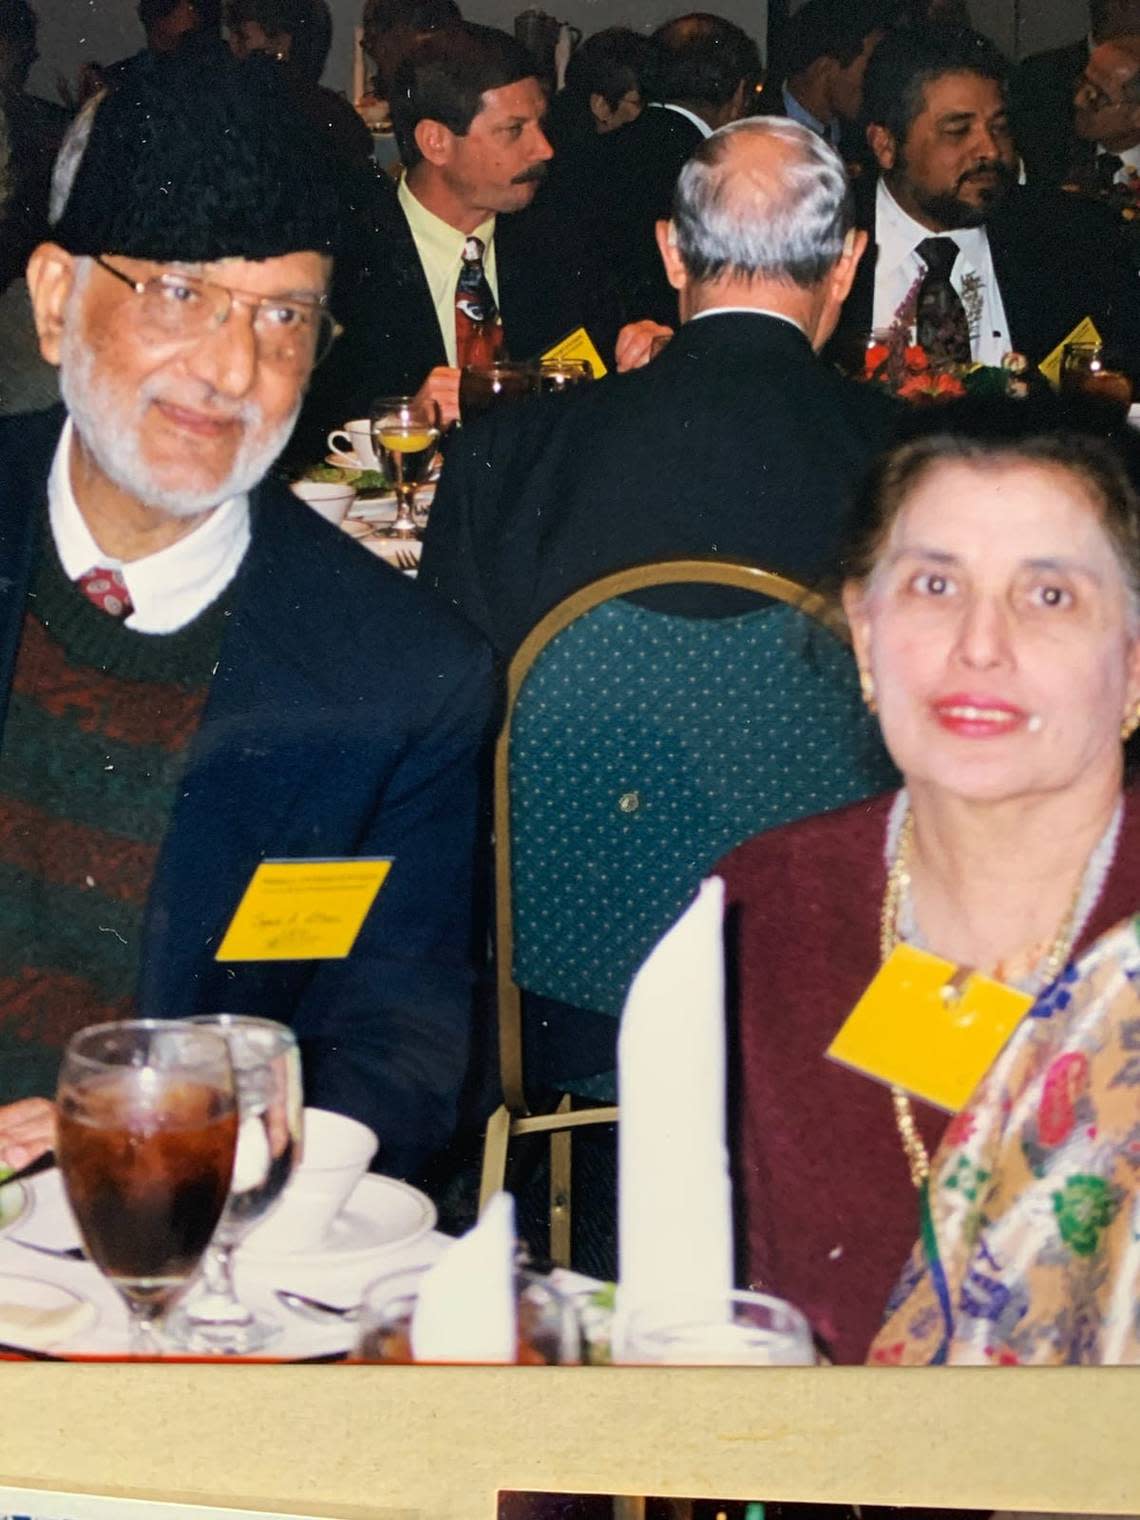 Syed Ahsani and his wife Sajida Ahsani attend a foreign policy conference at the George H.W. Bush Presidential Library & Museum in College Station, Texas.